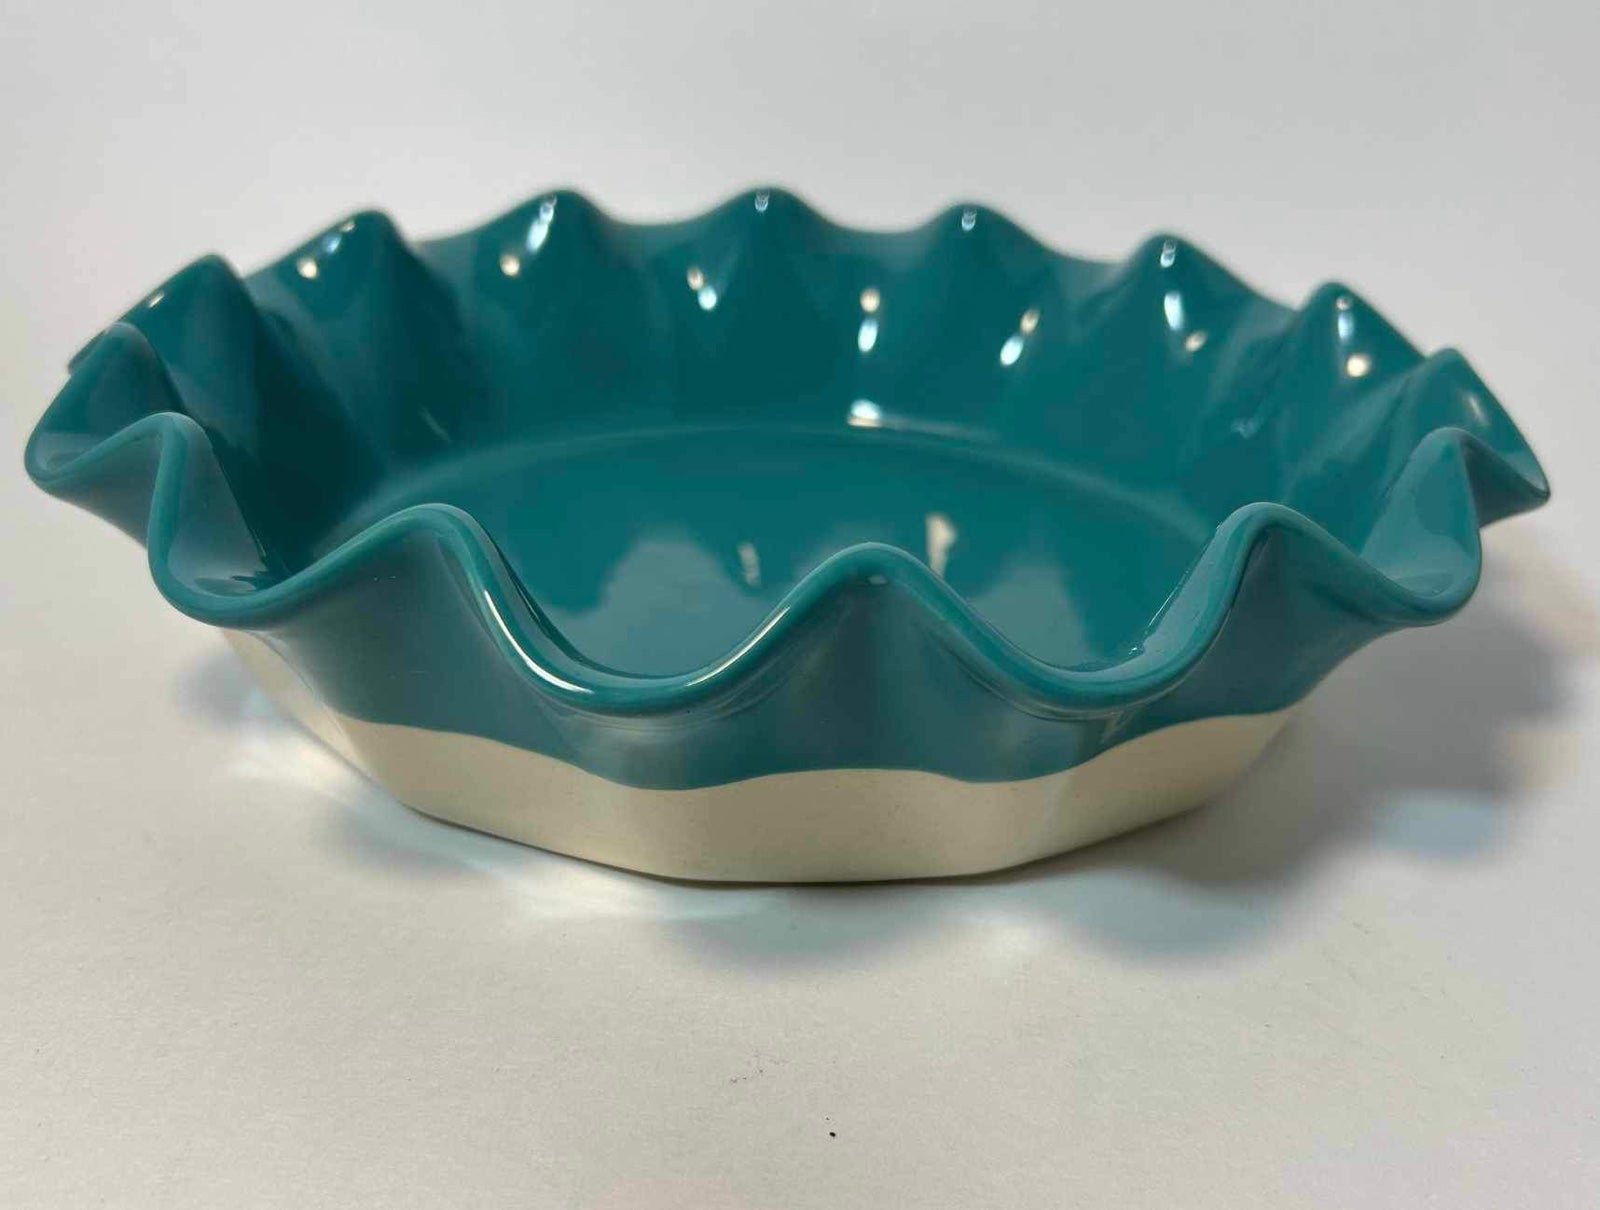 The Lakeside Collection Ruffled Edge Pie Plate Teal Cream Oven Stoneware 3bHCt7wba